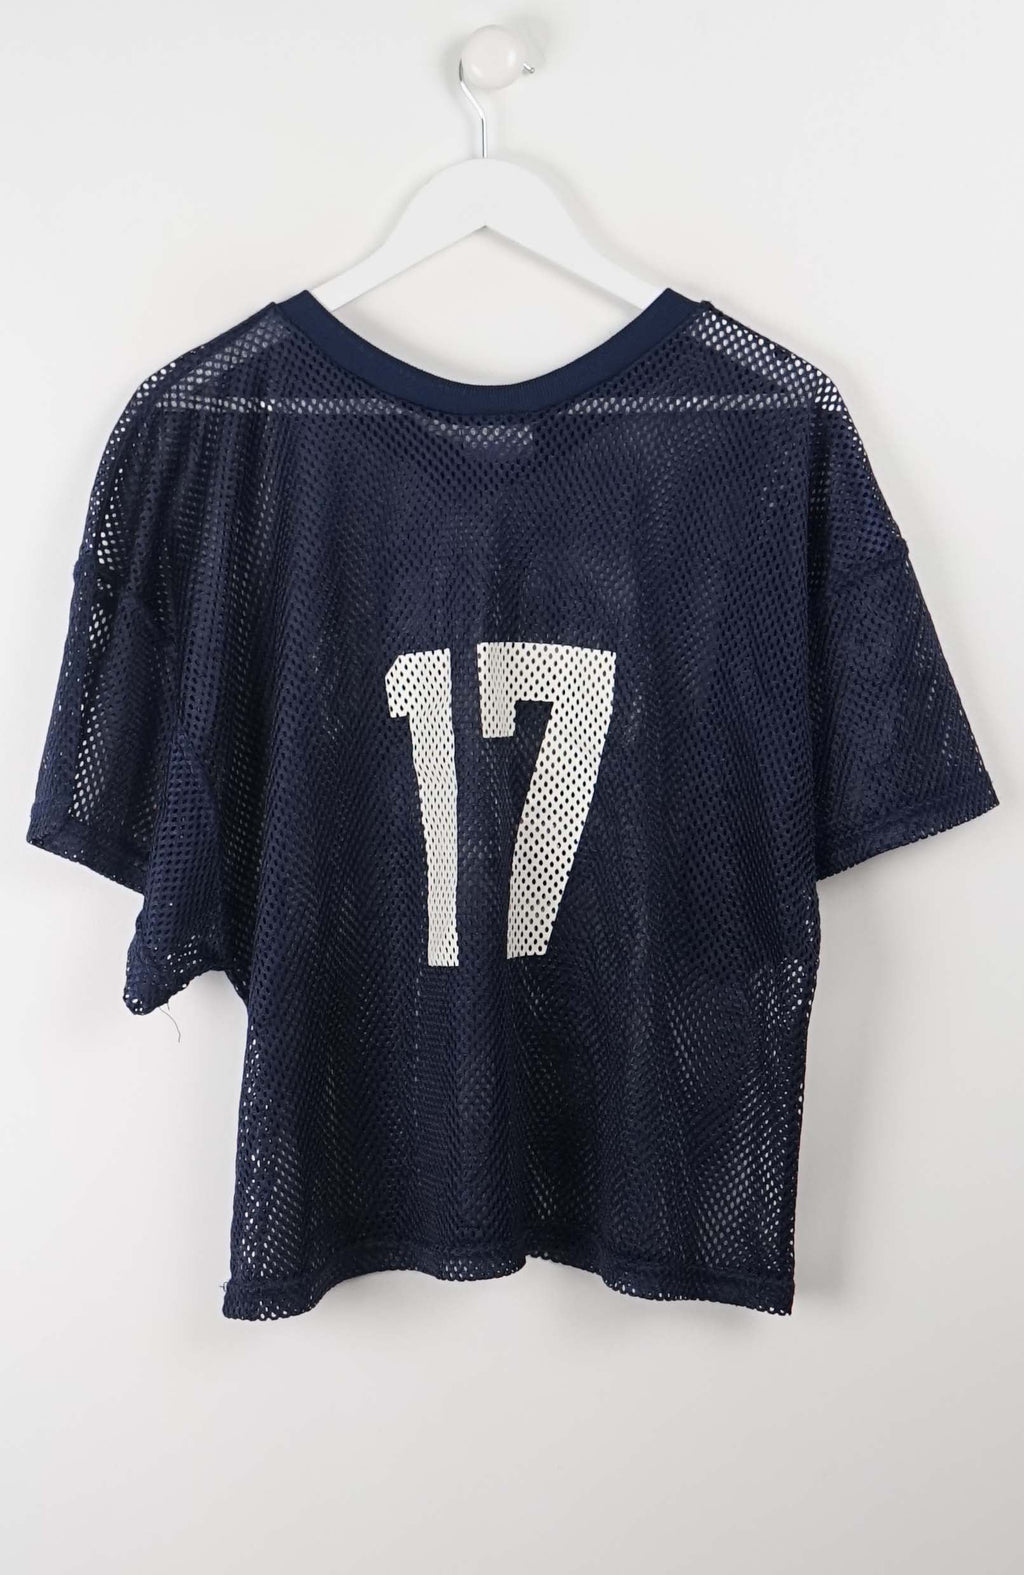 VINTAGE NFL CHARGERS CROPPED JERSEY (L)